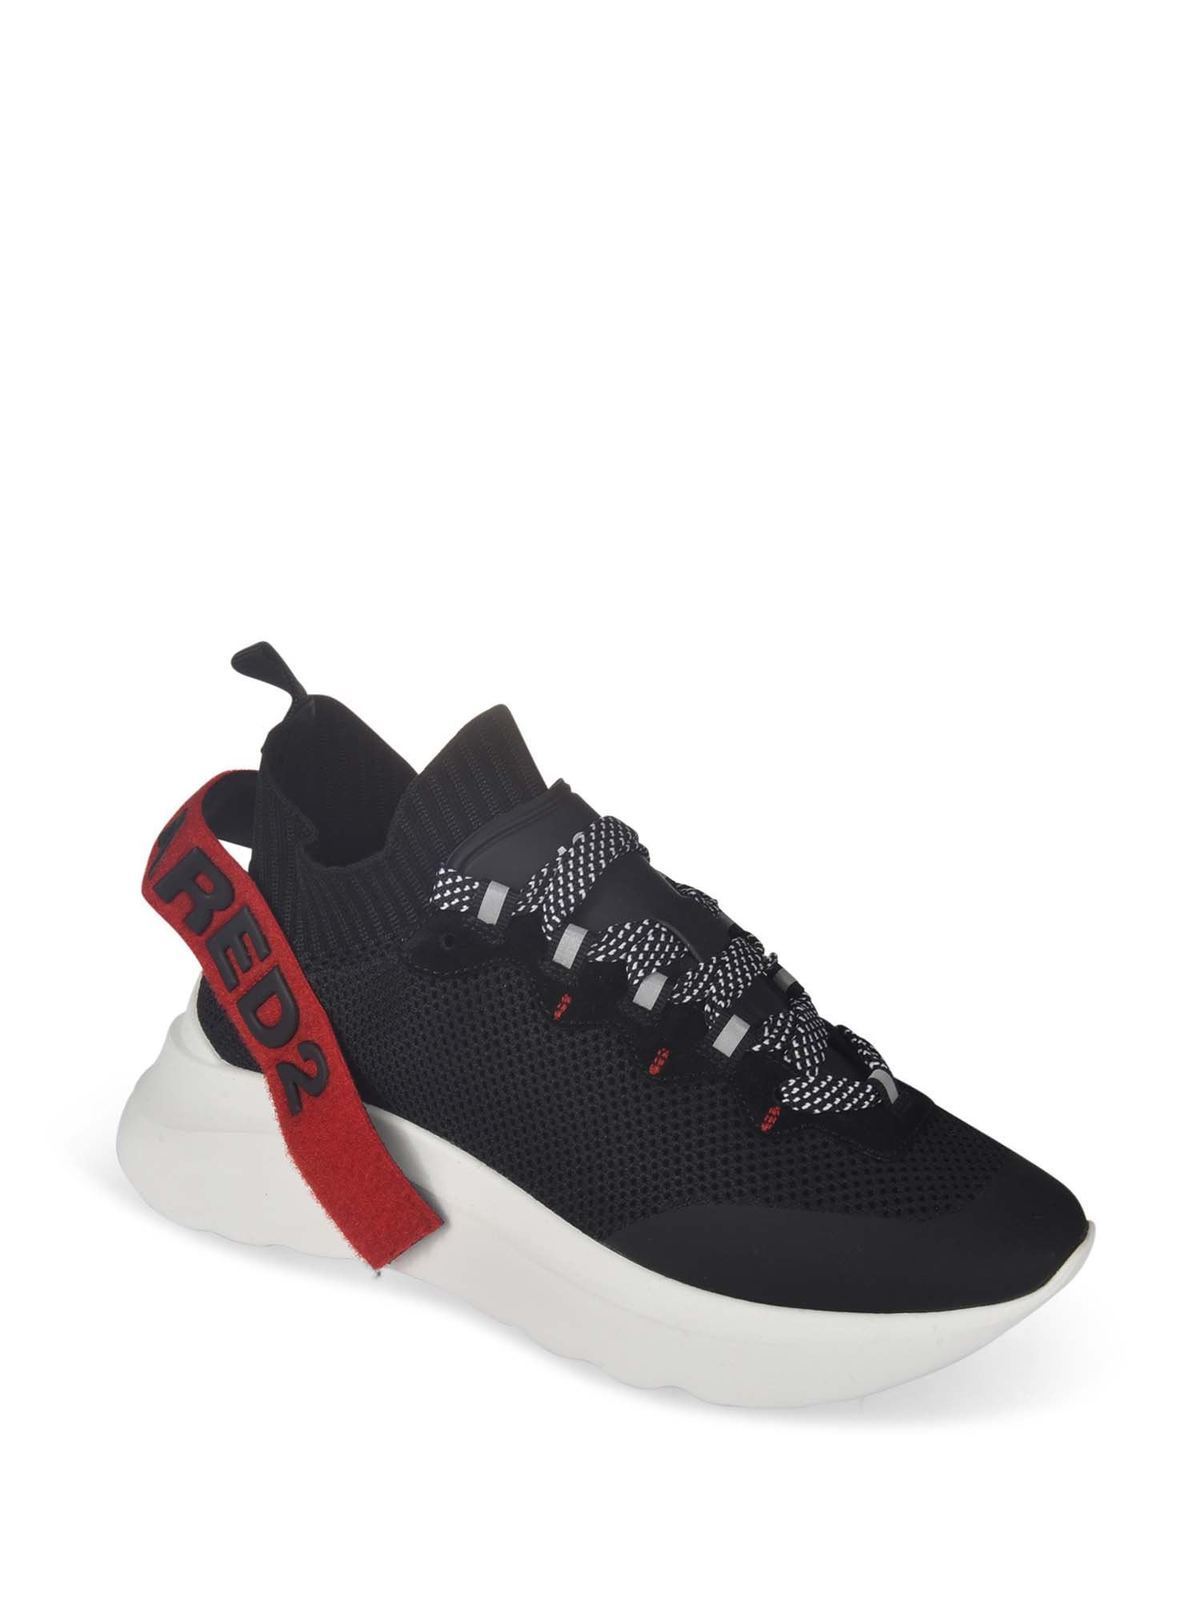 dsquared2 trainers